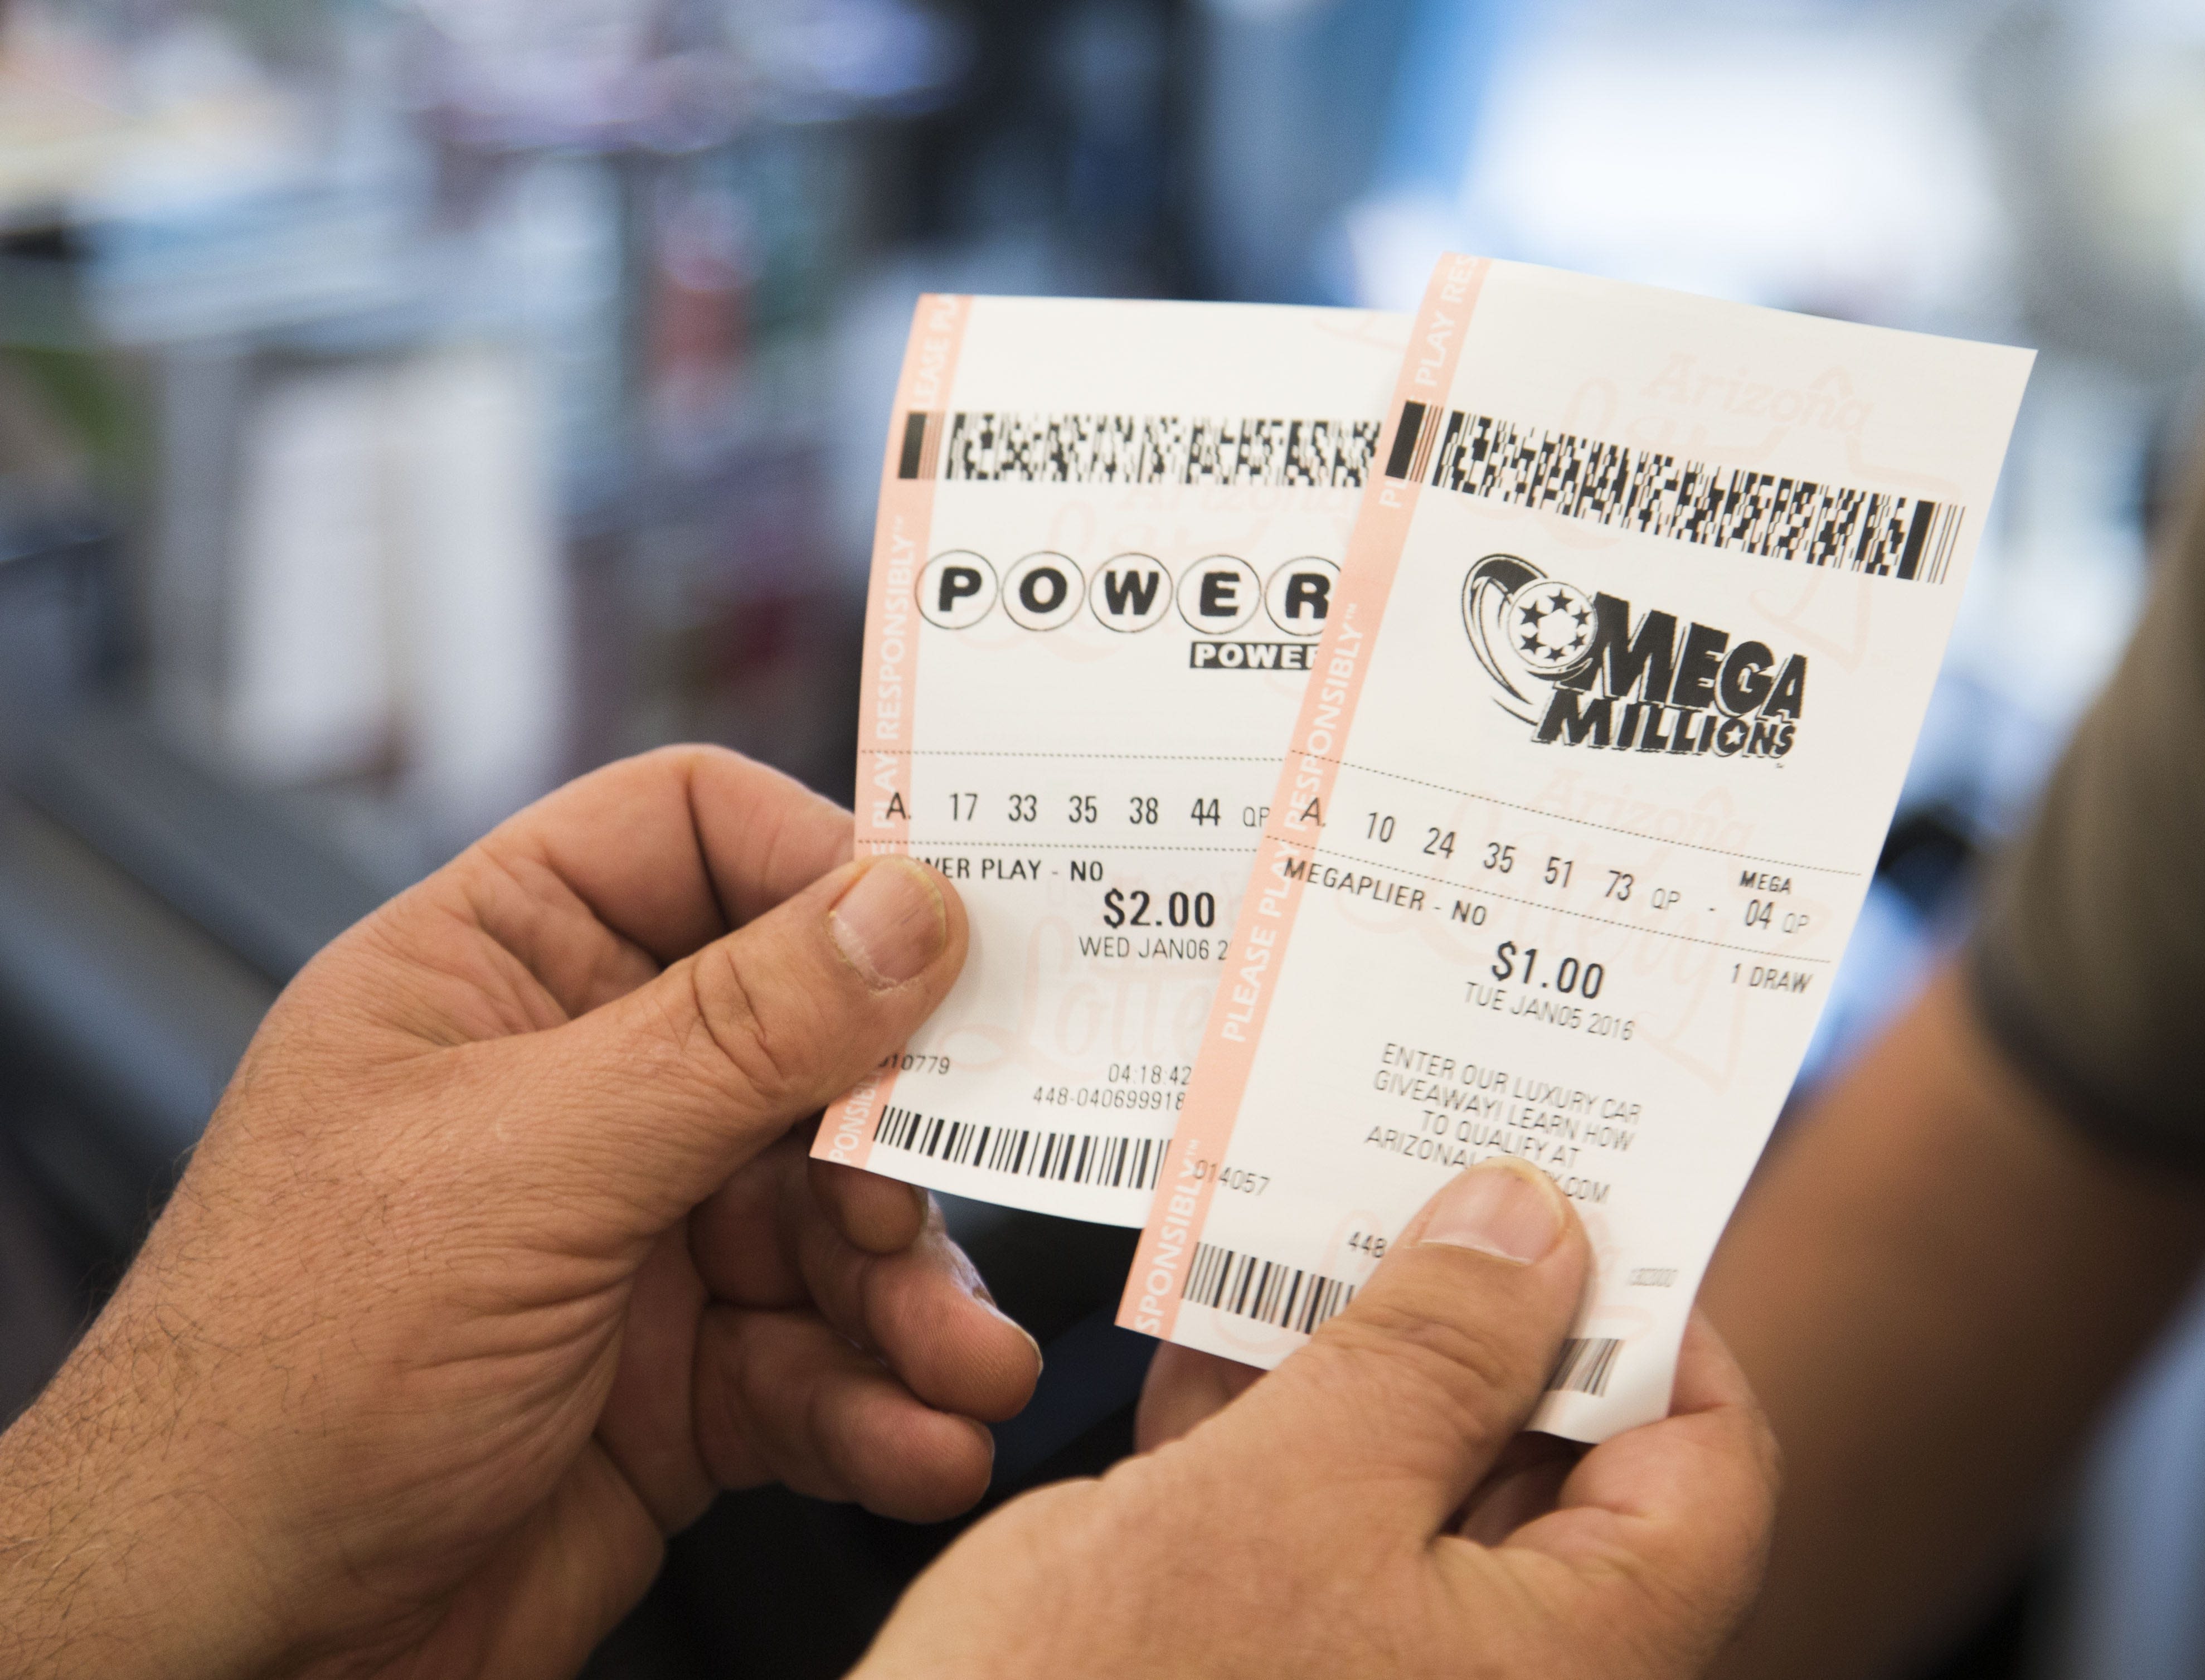 Check your lottery tickets! $50,000 Powerball ticket was sold at this Arizona store